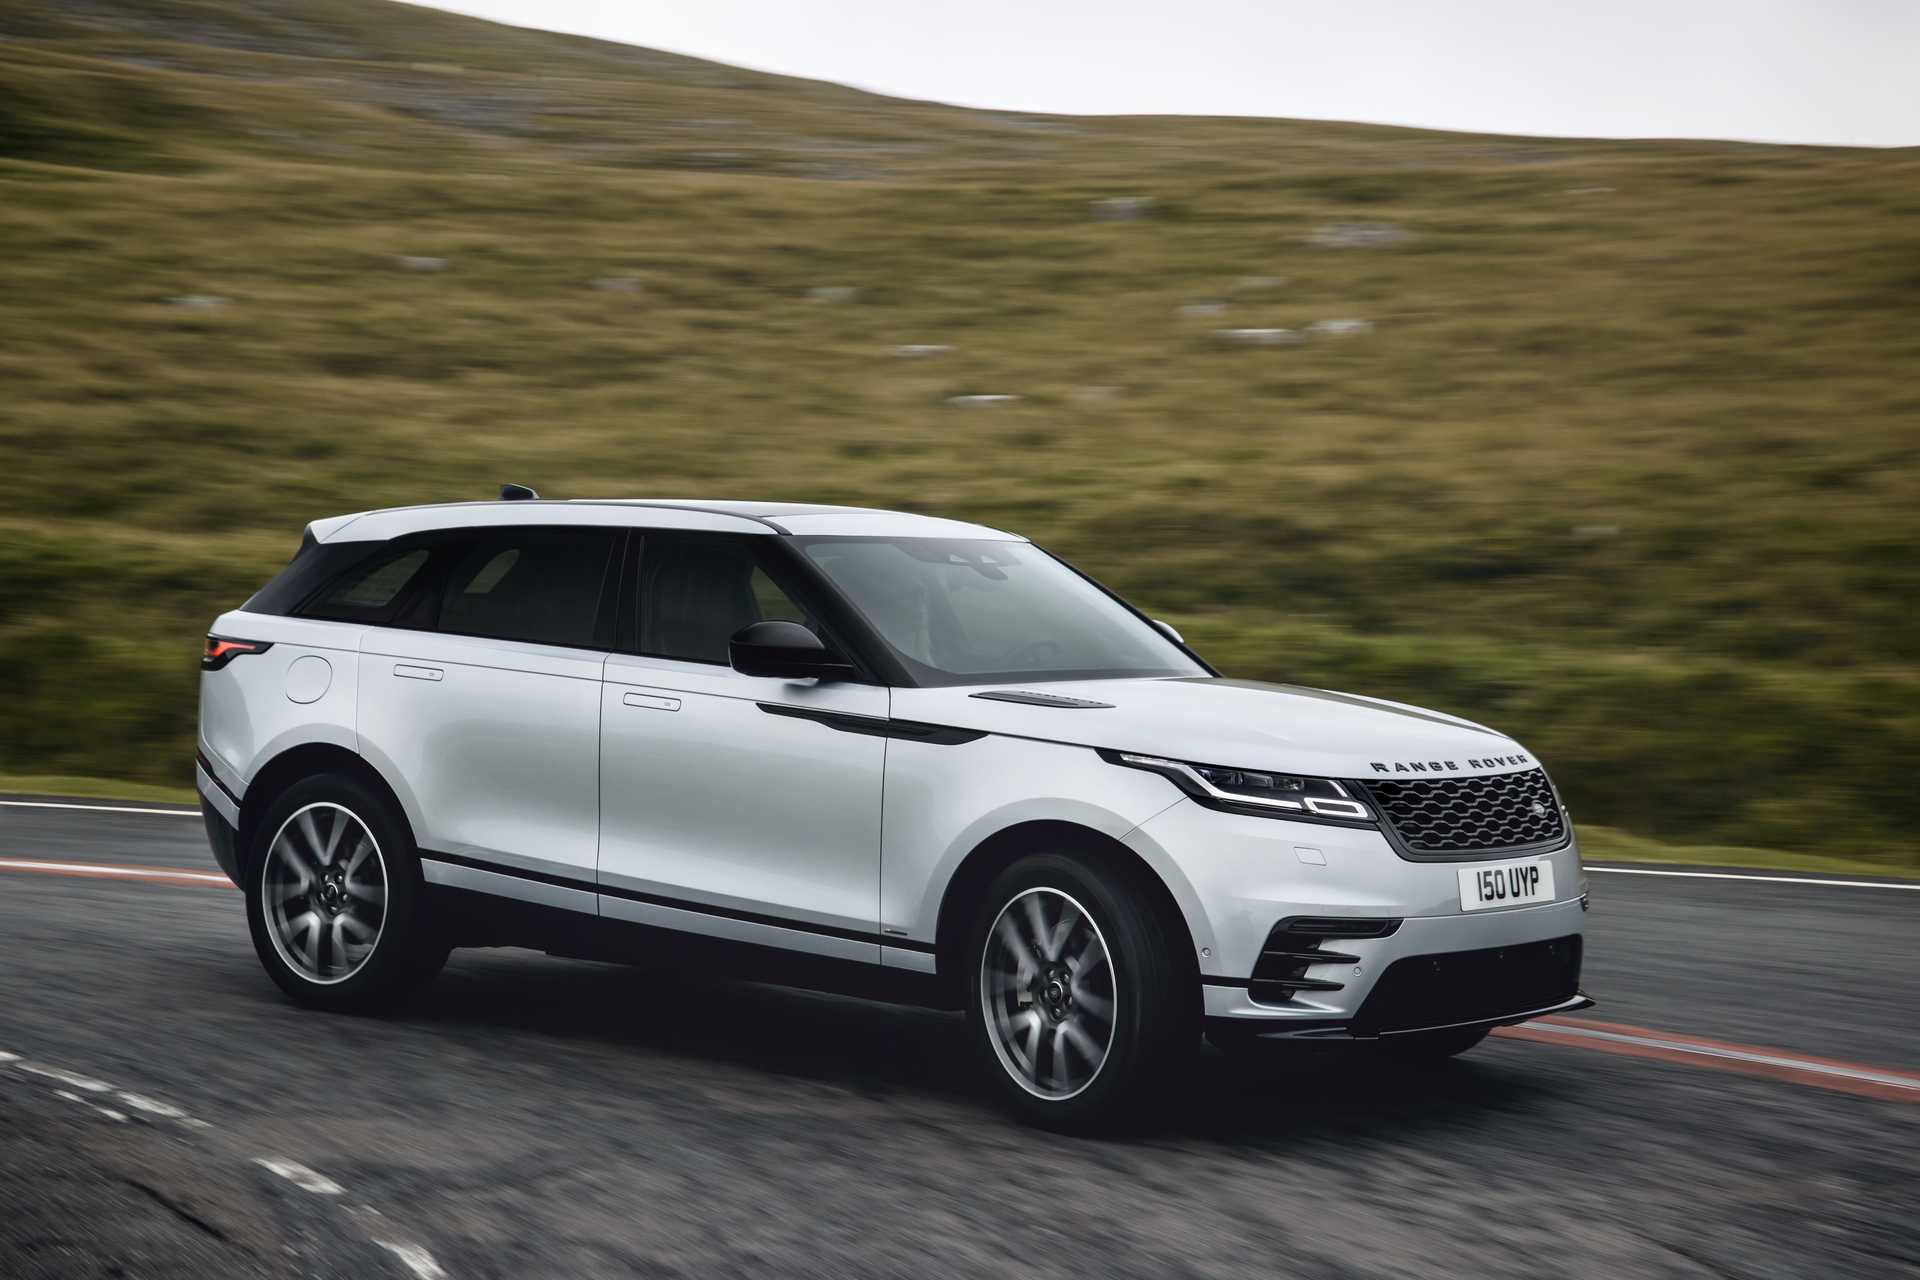 High Quality Tuning Files Land Rover Velar 5.0 V8 Supercharged SVAutobiography Dynamic Edition 550hp